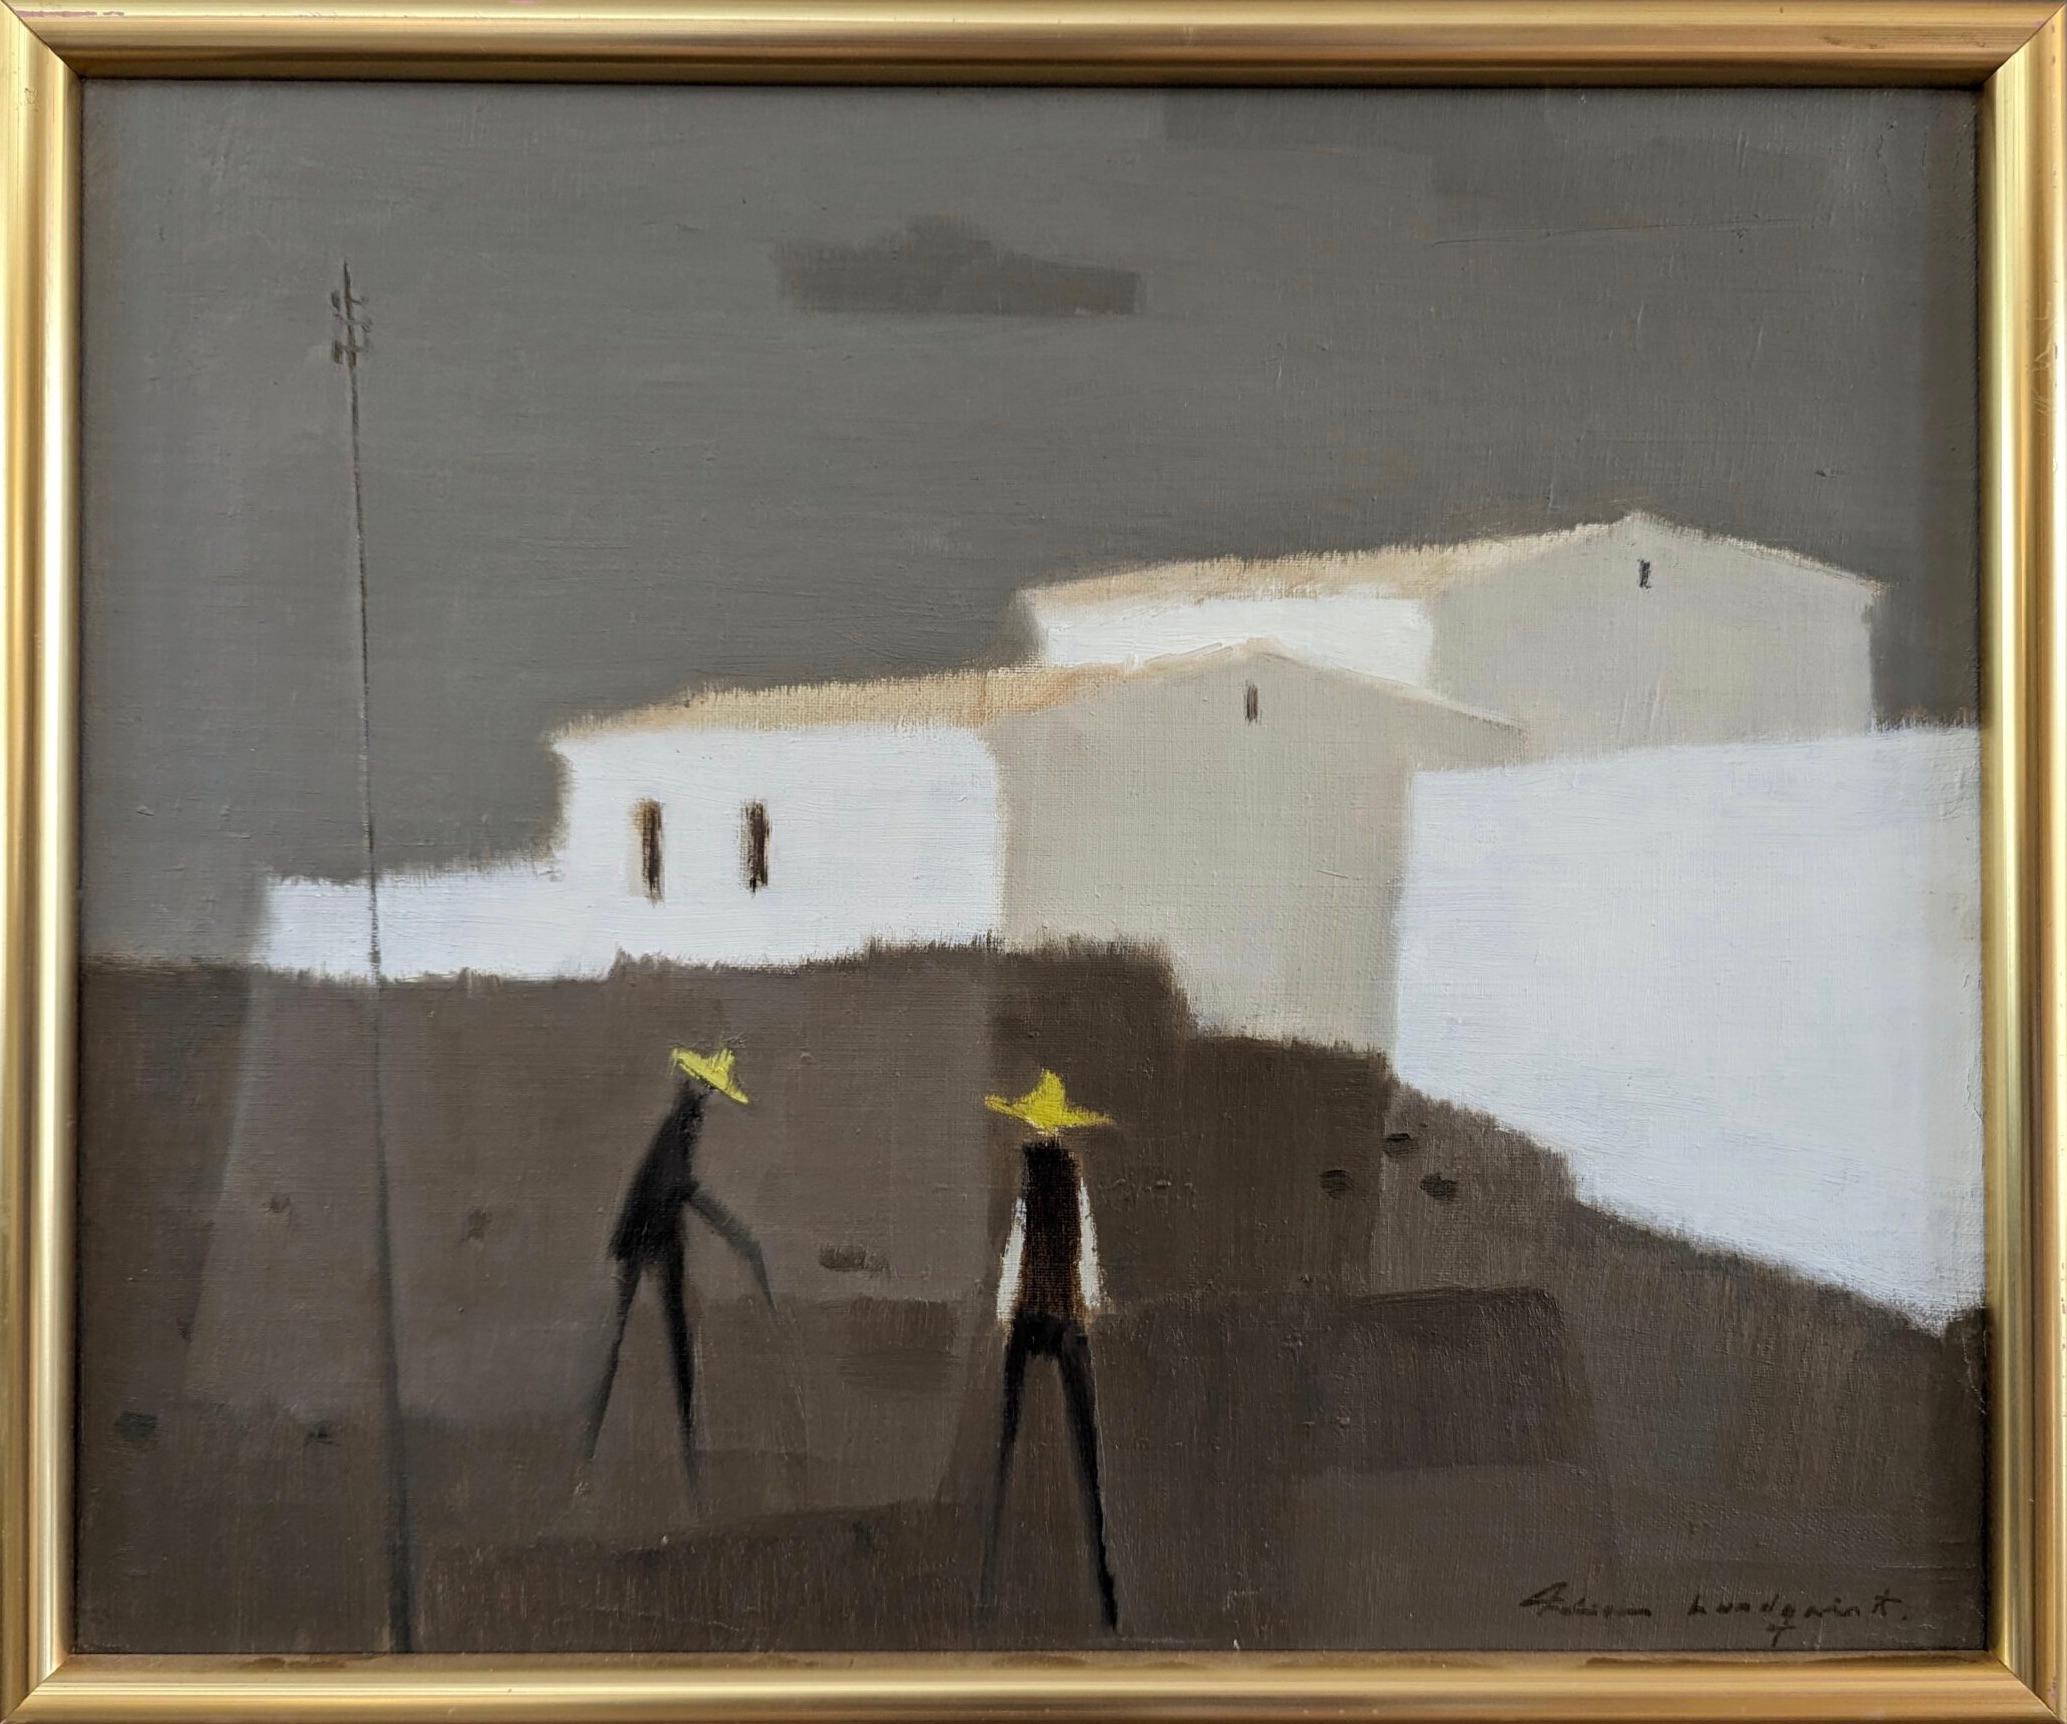 SOUTHERN FARMERS 
Size: 41 x 49 cm (including frame)
Oil on Canvas

A subdued and soothing mid-century modernist style composition, executed in oil onto canvas by the established Swedish artist Fabian Lundqvist (1913-1989), whose works have been